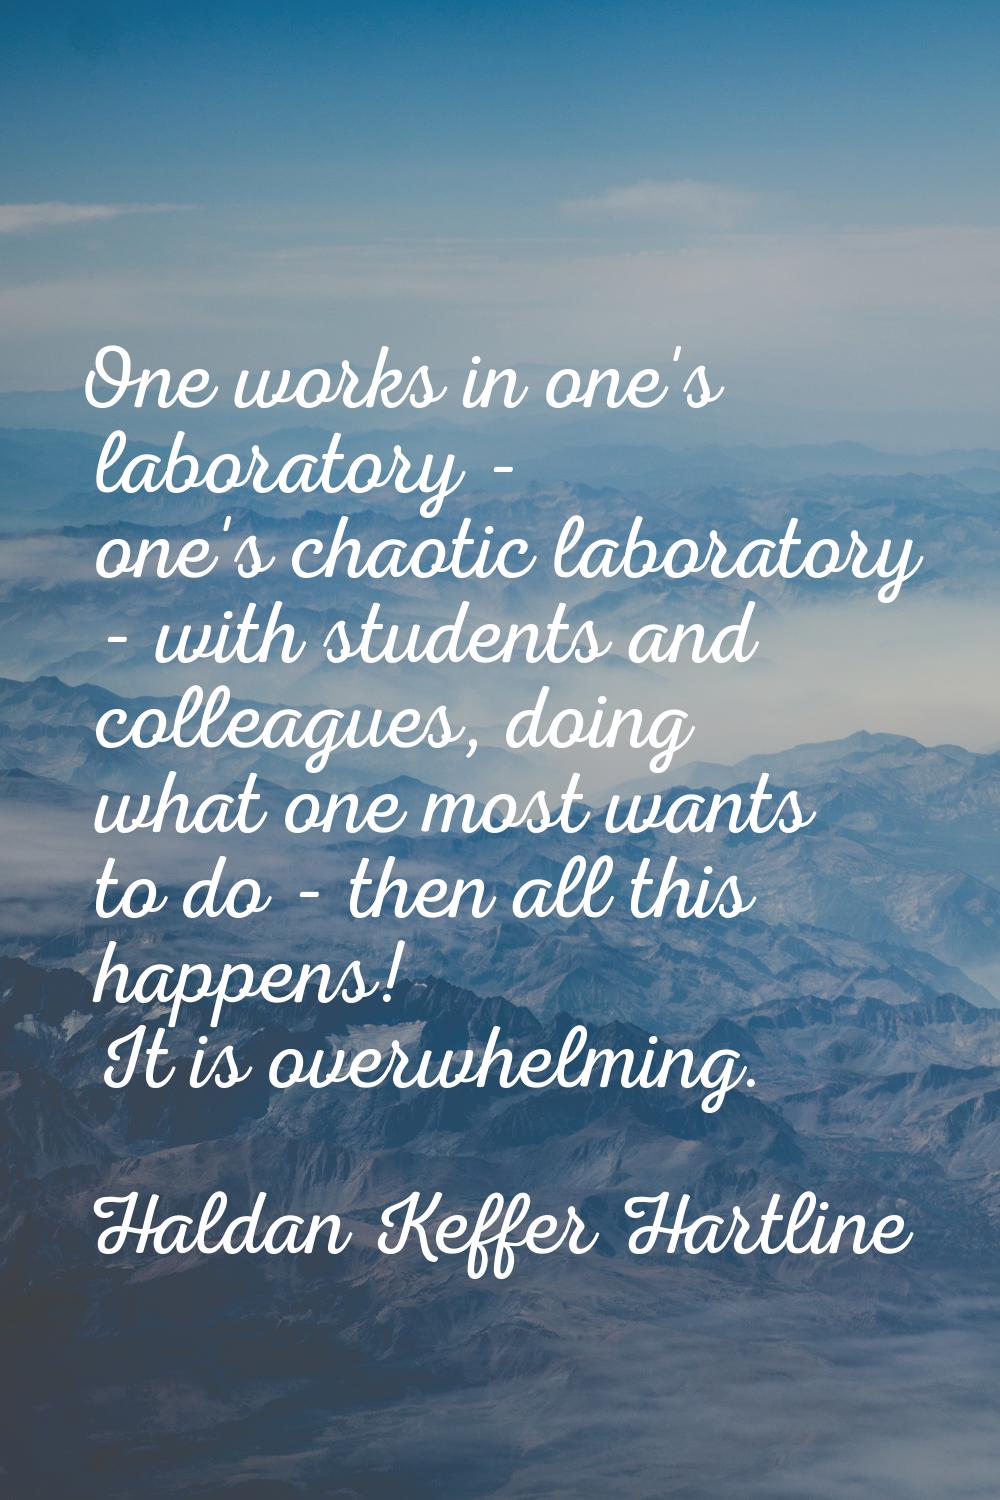 One works in one's laboratory - one's chaotic laboratory - with students and colleagues, doing what